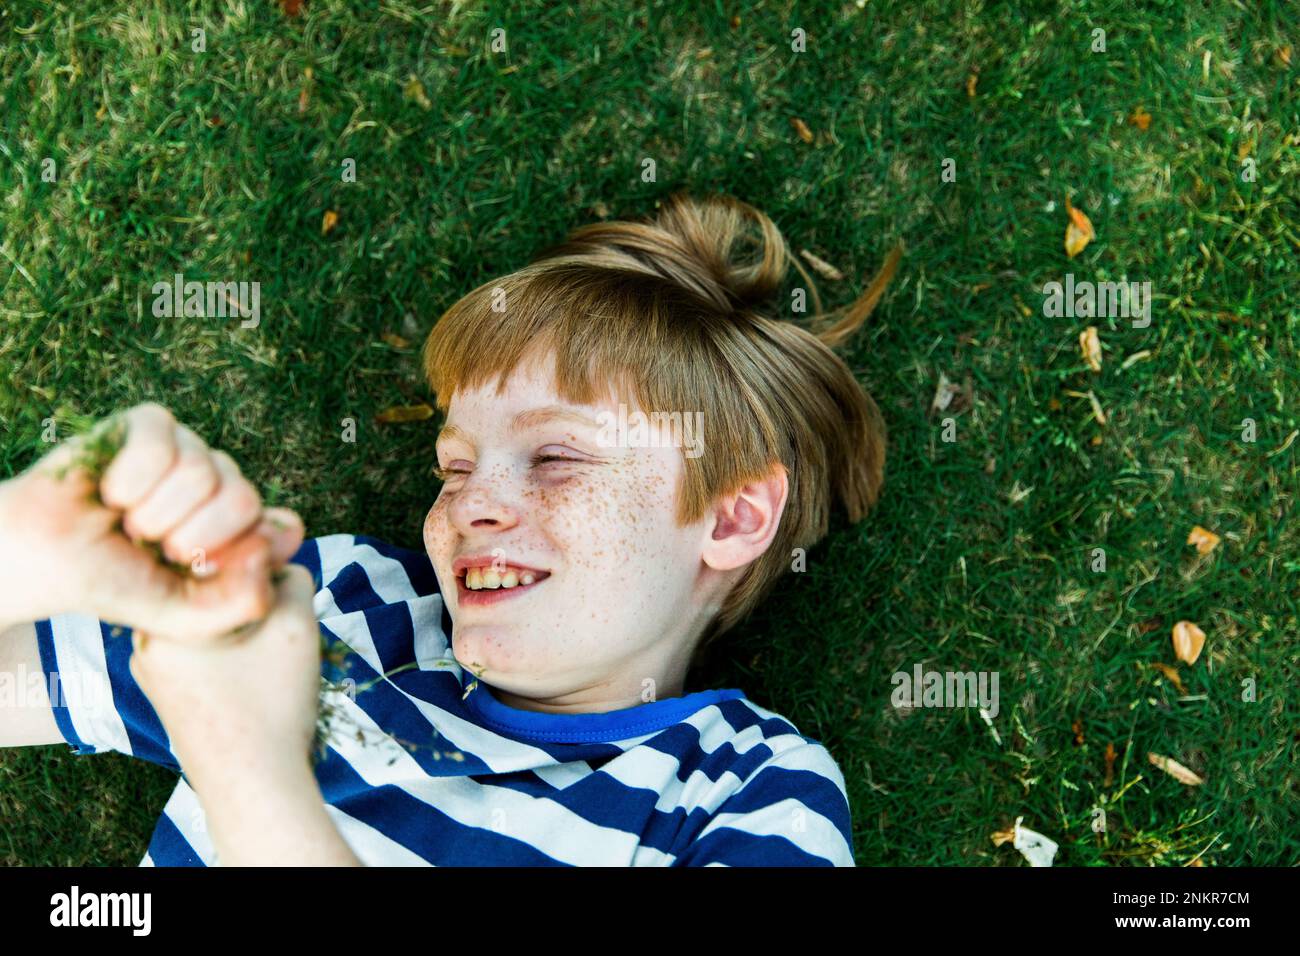 Boy with freckles lying on grass, smiling Stock Photo